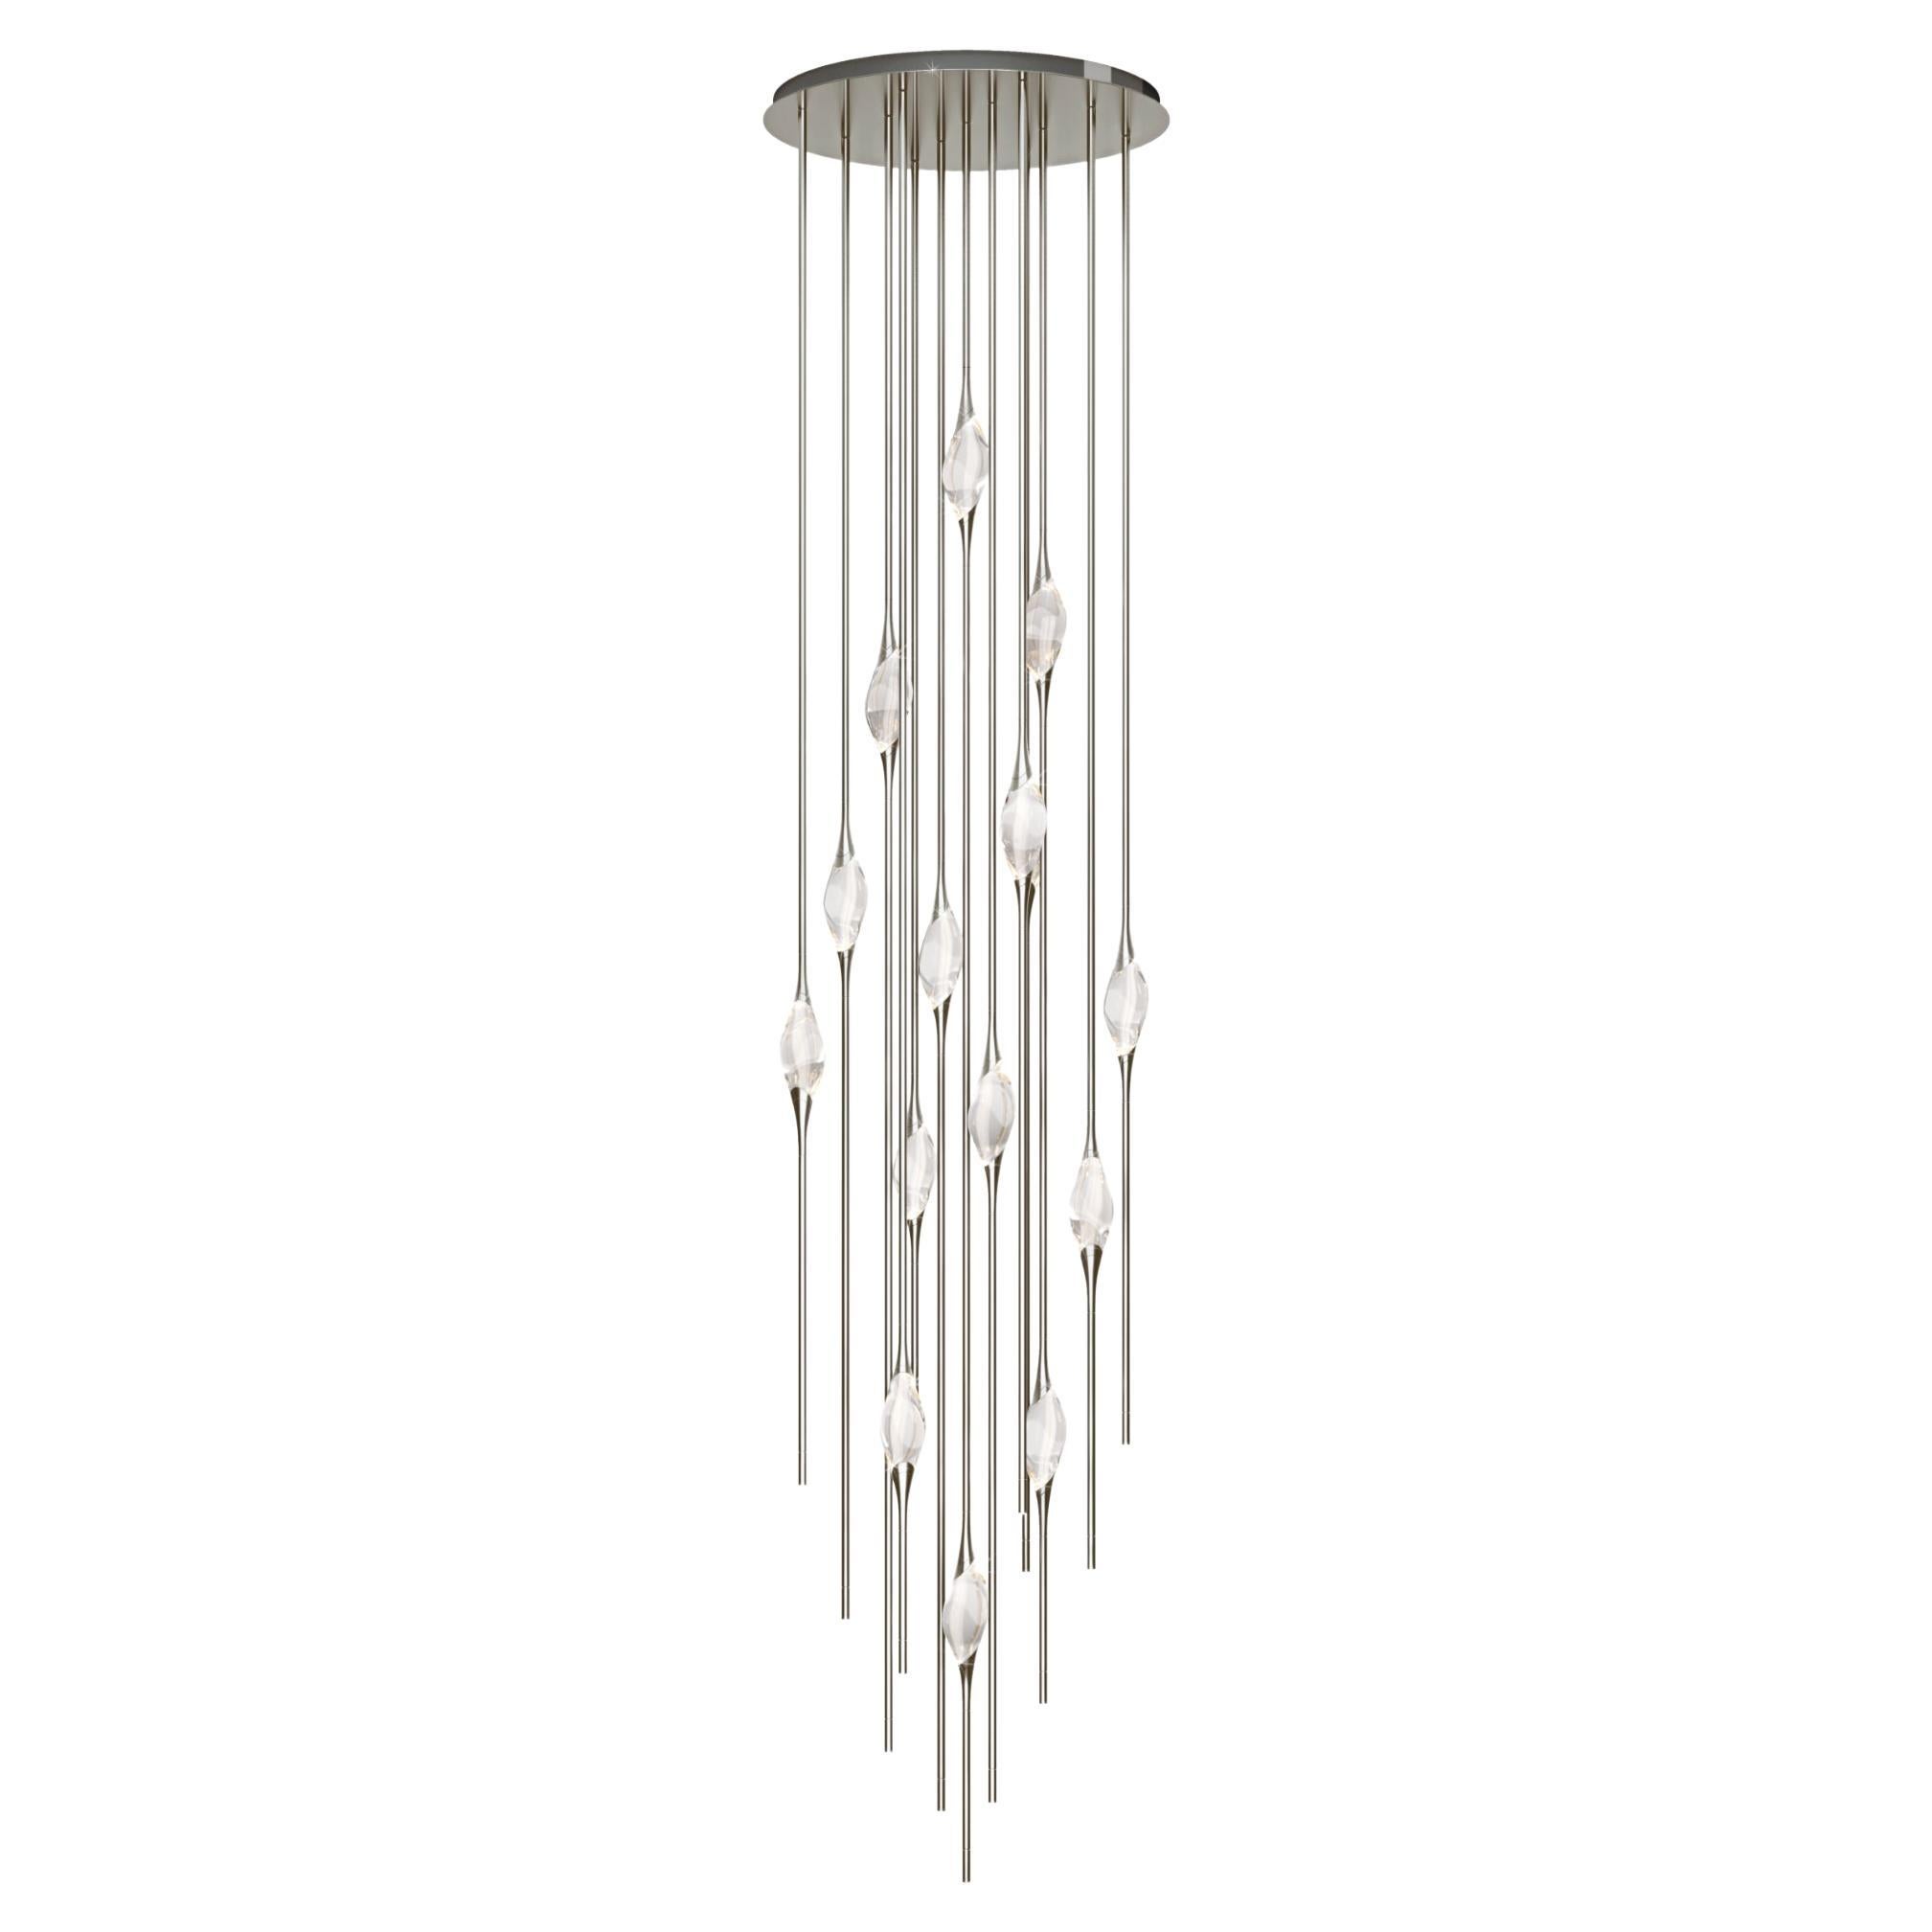 "Il Pezzo 12 Cluster Chandelier" - height 350cm/137" - nickel - crystal - LEDs